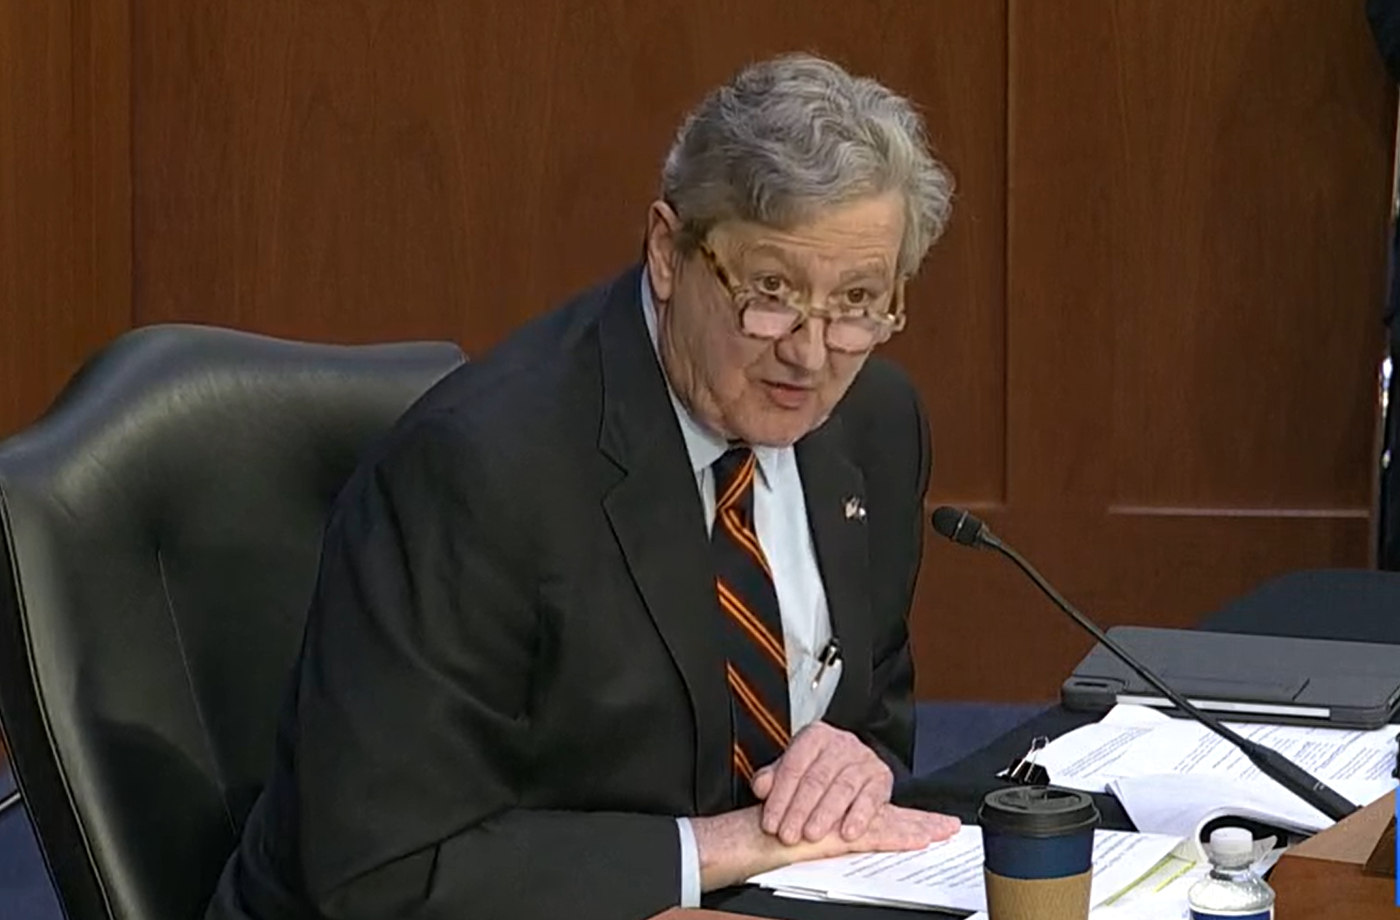 ‘Are You Going To Call Me A Sick F**k?!’ Sen. John Kennedy Presses Climate Professor Over Tweet Attacking Joe Manchin